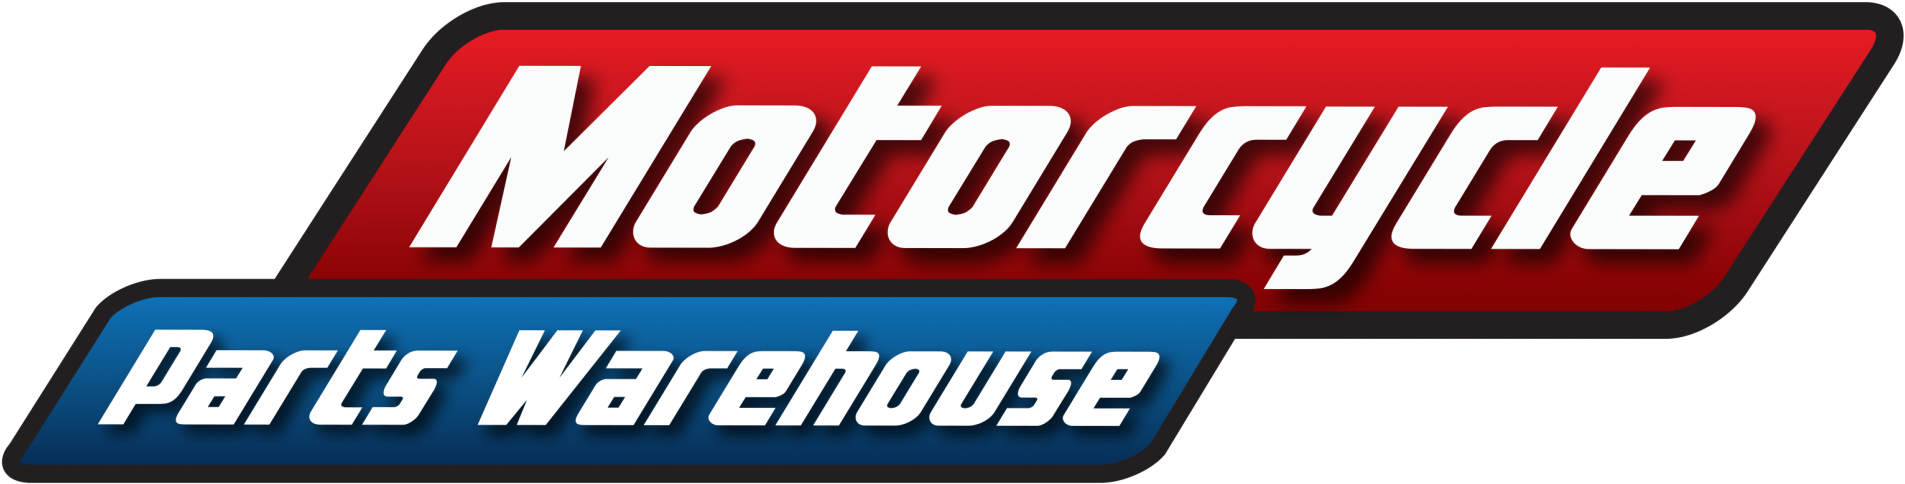 All New Toro Motorcycle Exhaust Range - Motorcycle Parts Warehouse Logo Clipart (1920x491), Png Download